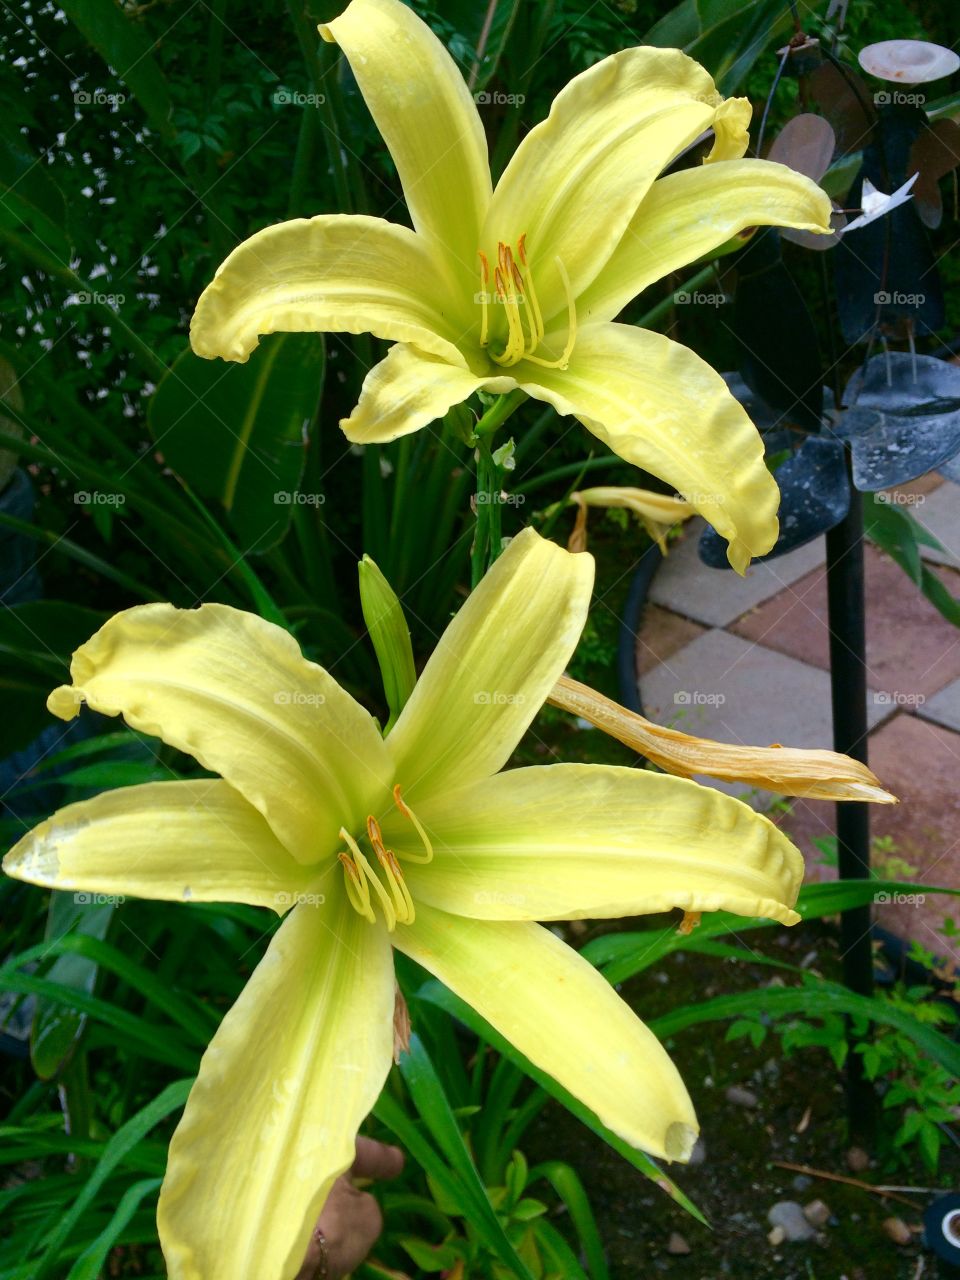 Lovely Lillies 